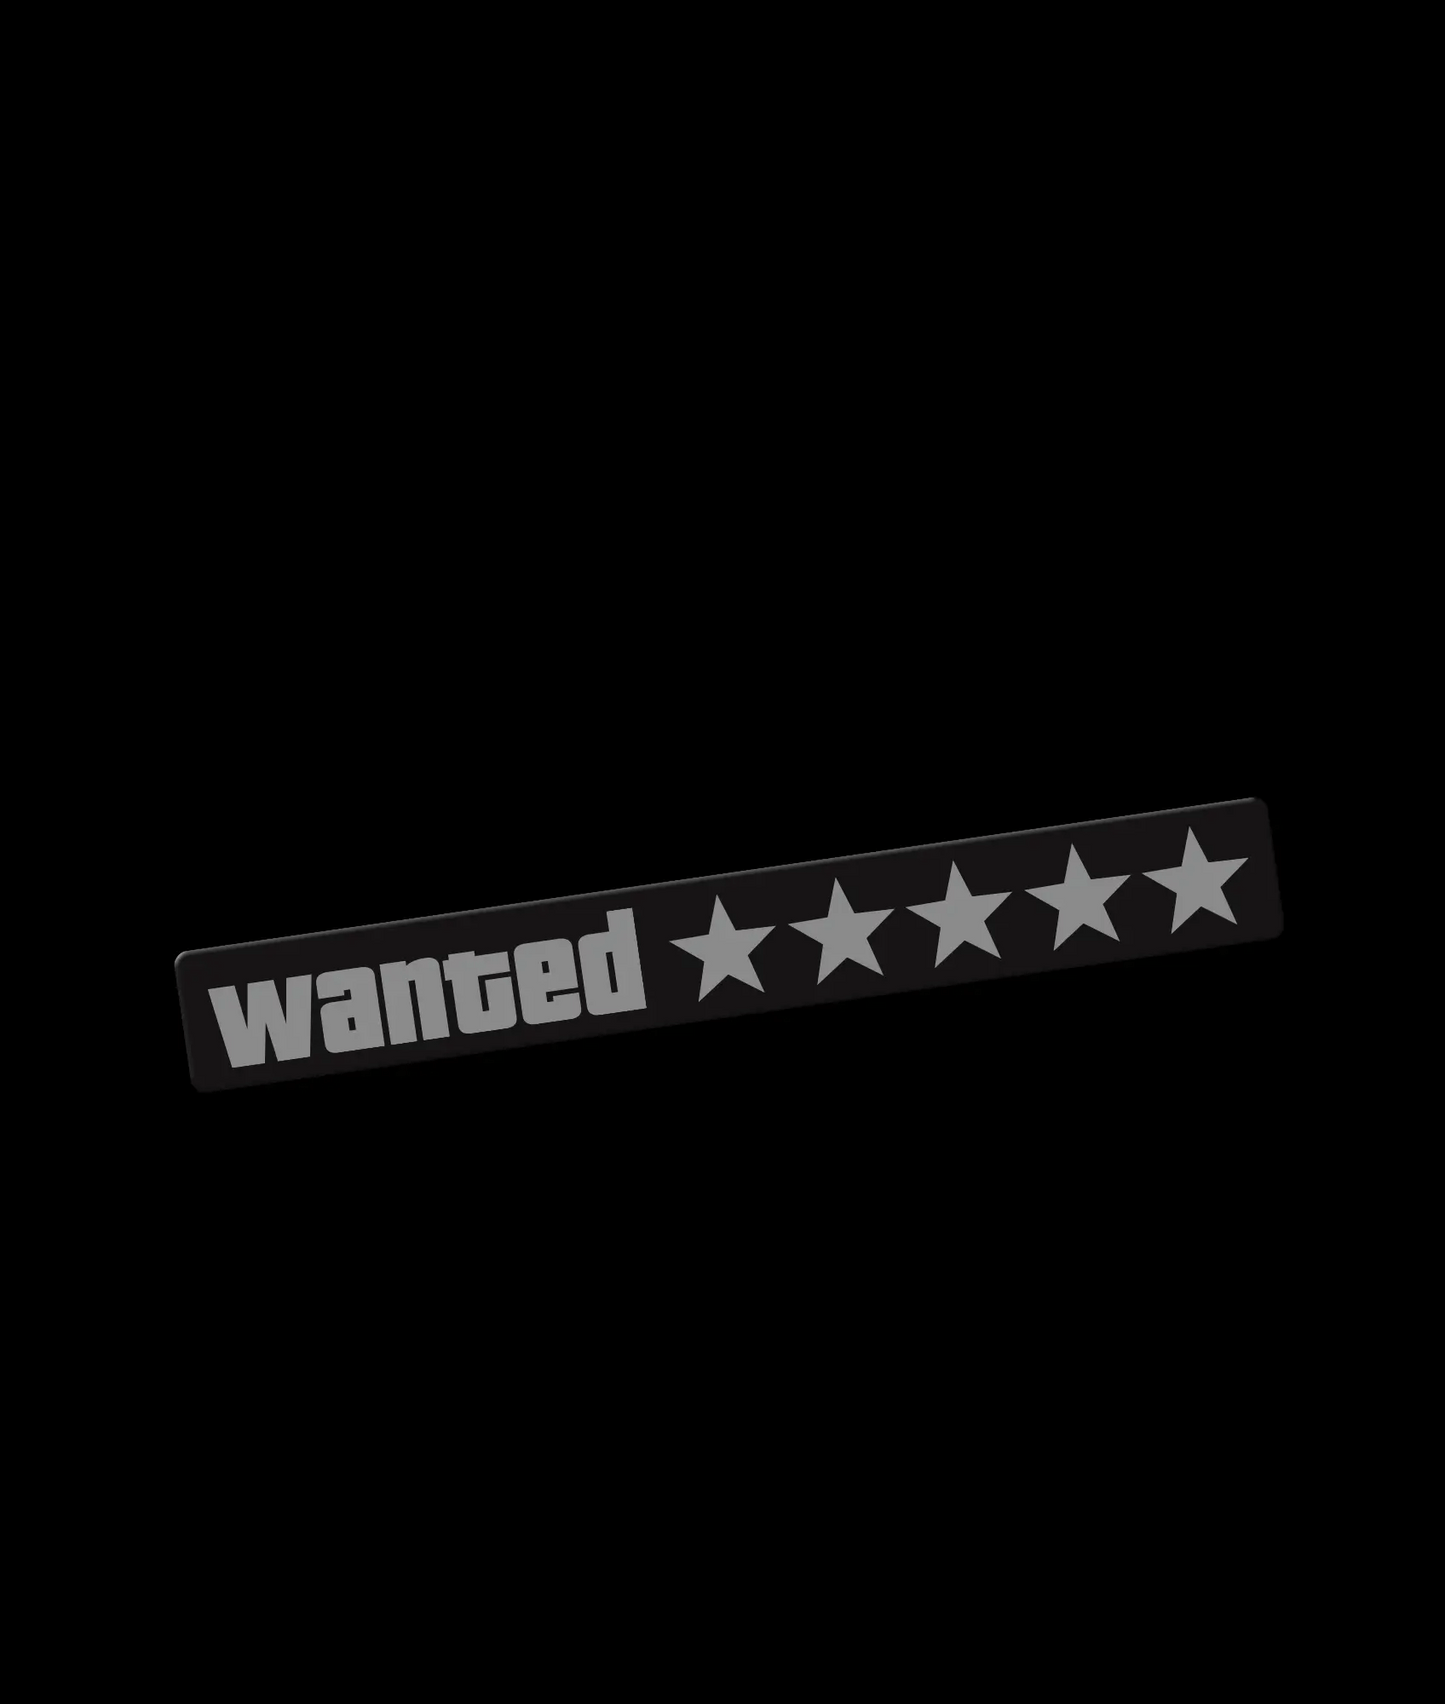 Wanted ★★★★★ | LED Decal | USB Powered